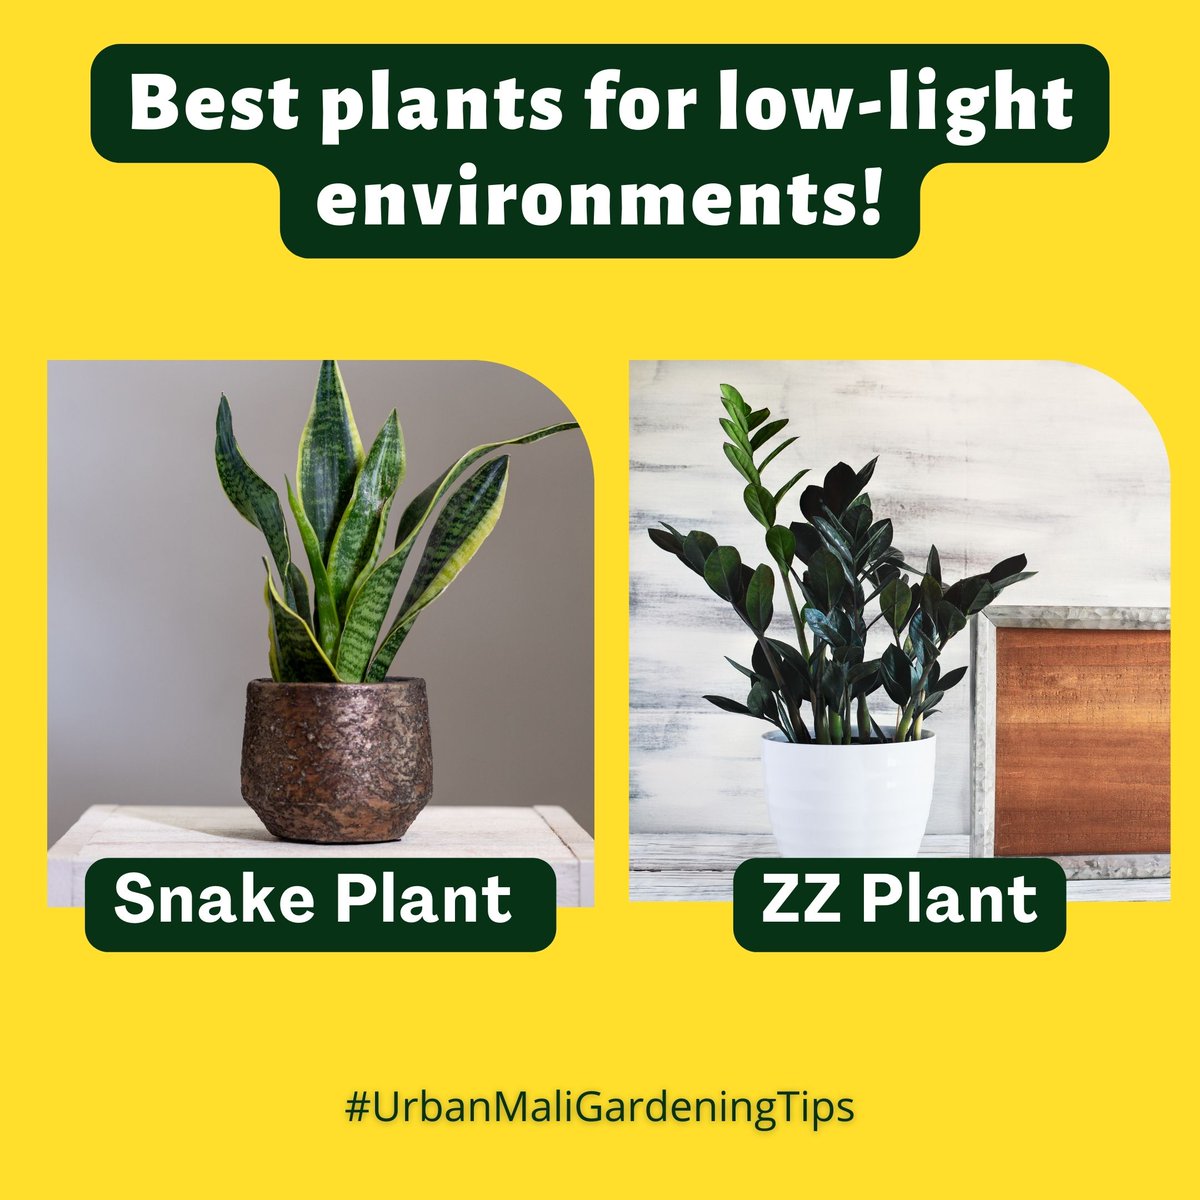 Bringing life to every corner of your home! Discover the best plants for low-light environments that thrive even in the shadiest spots. =

#LowLightPlants #GreenLiving #IndoorGarden #NatureAtHome#plantaddict #plantlife #urbangardening #homegardening #urbanmali